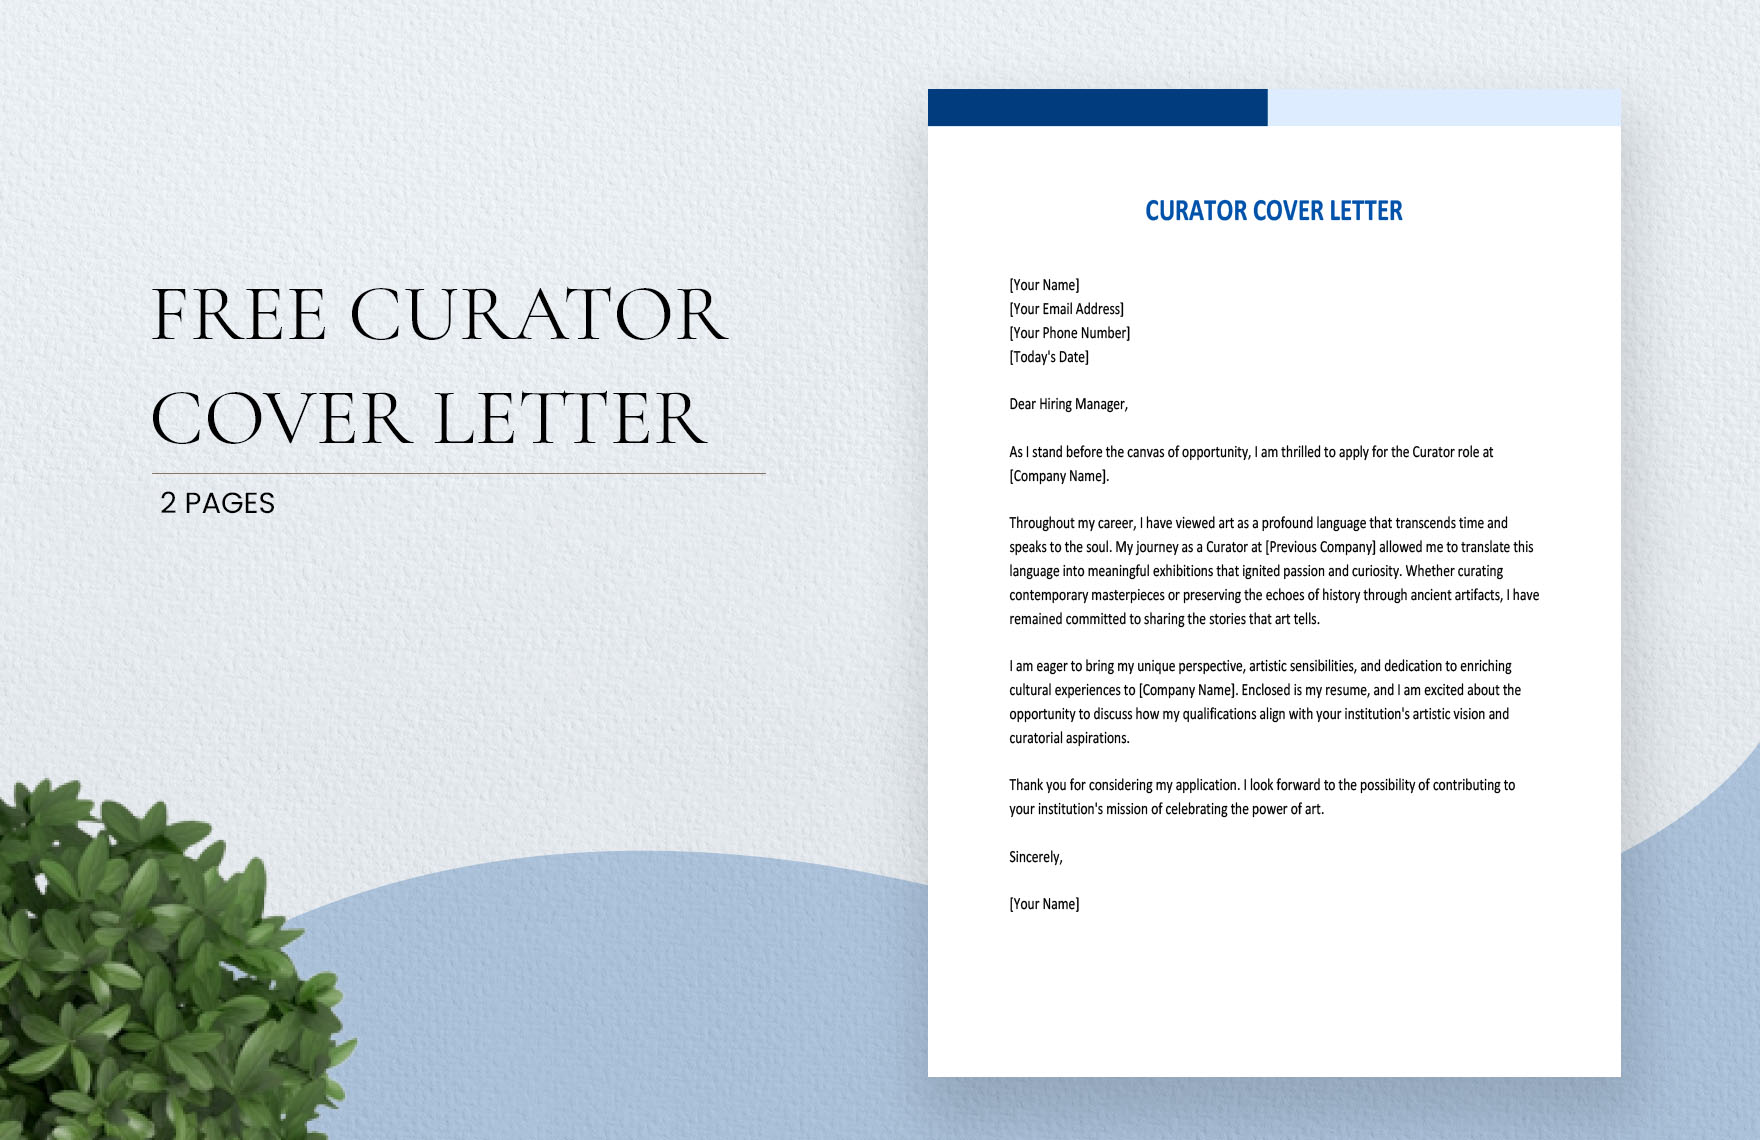 Curator Cover Letter in Word, Google Docs